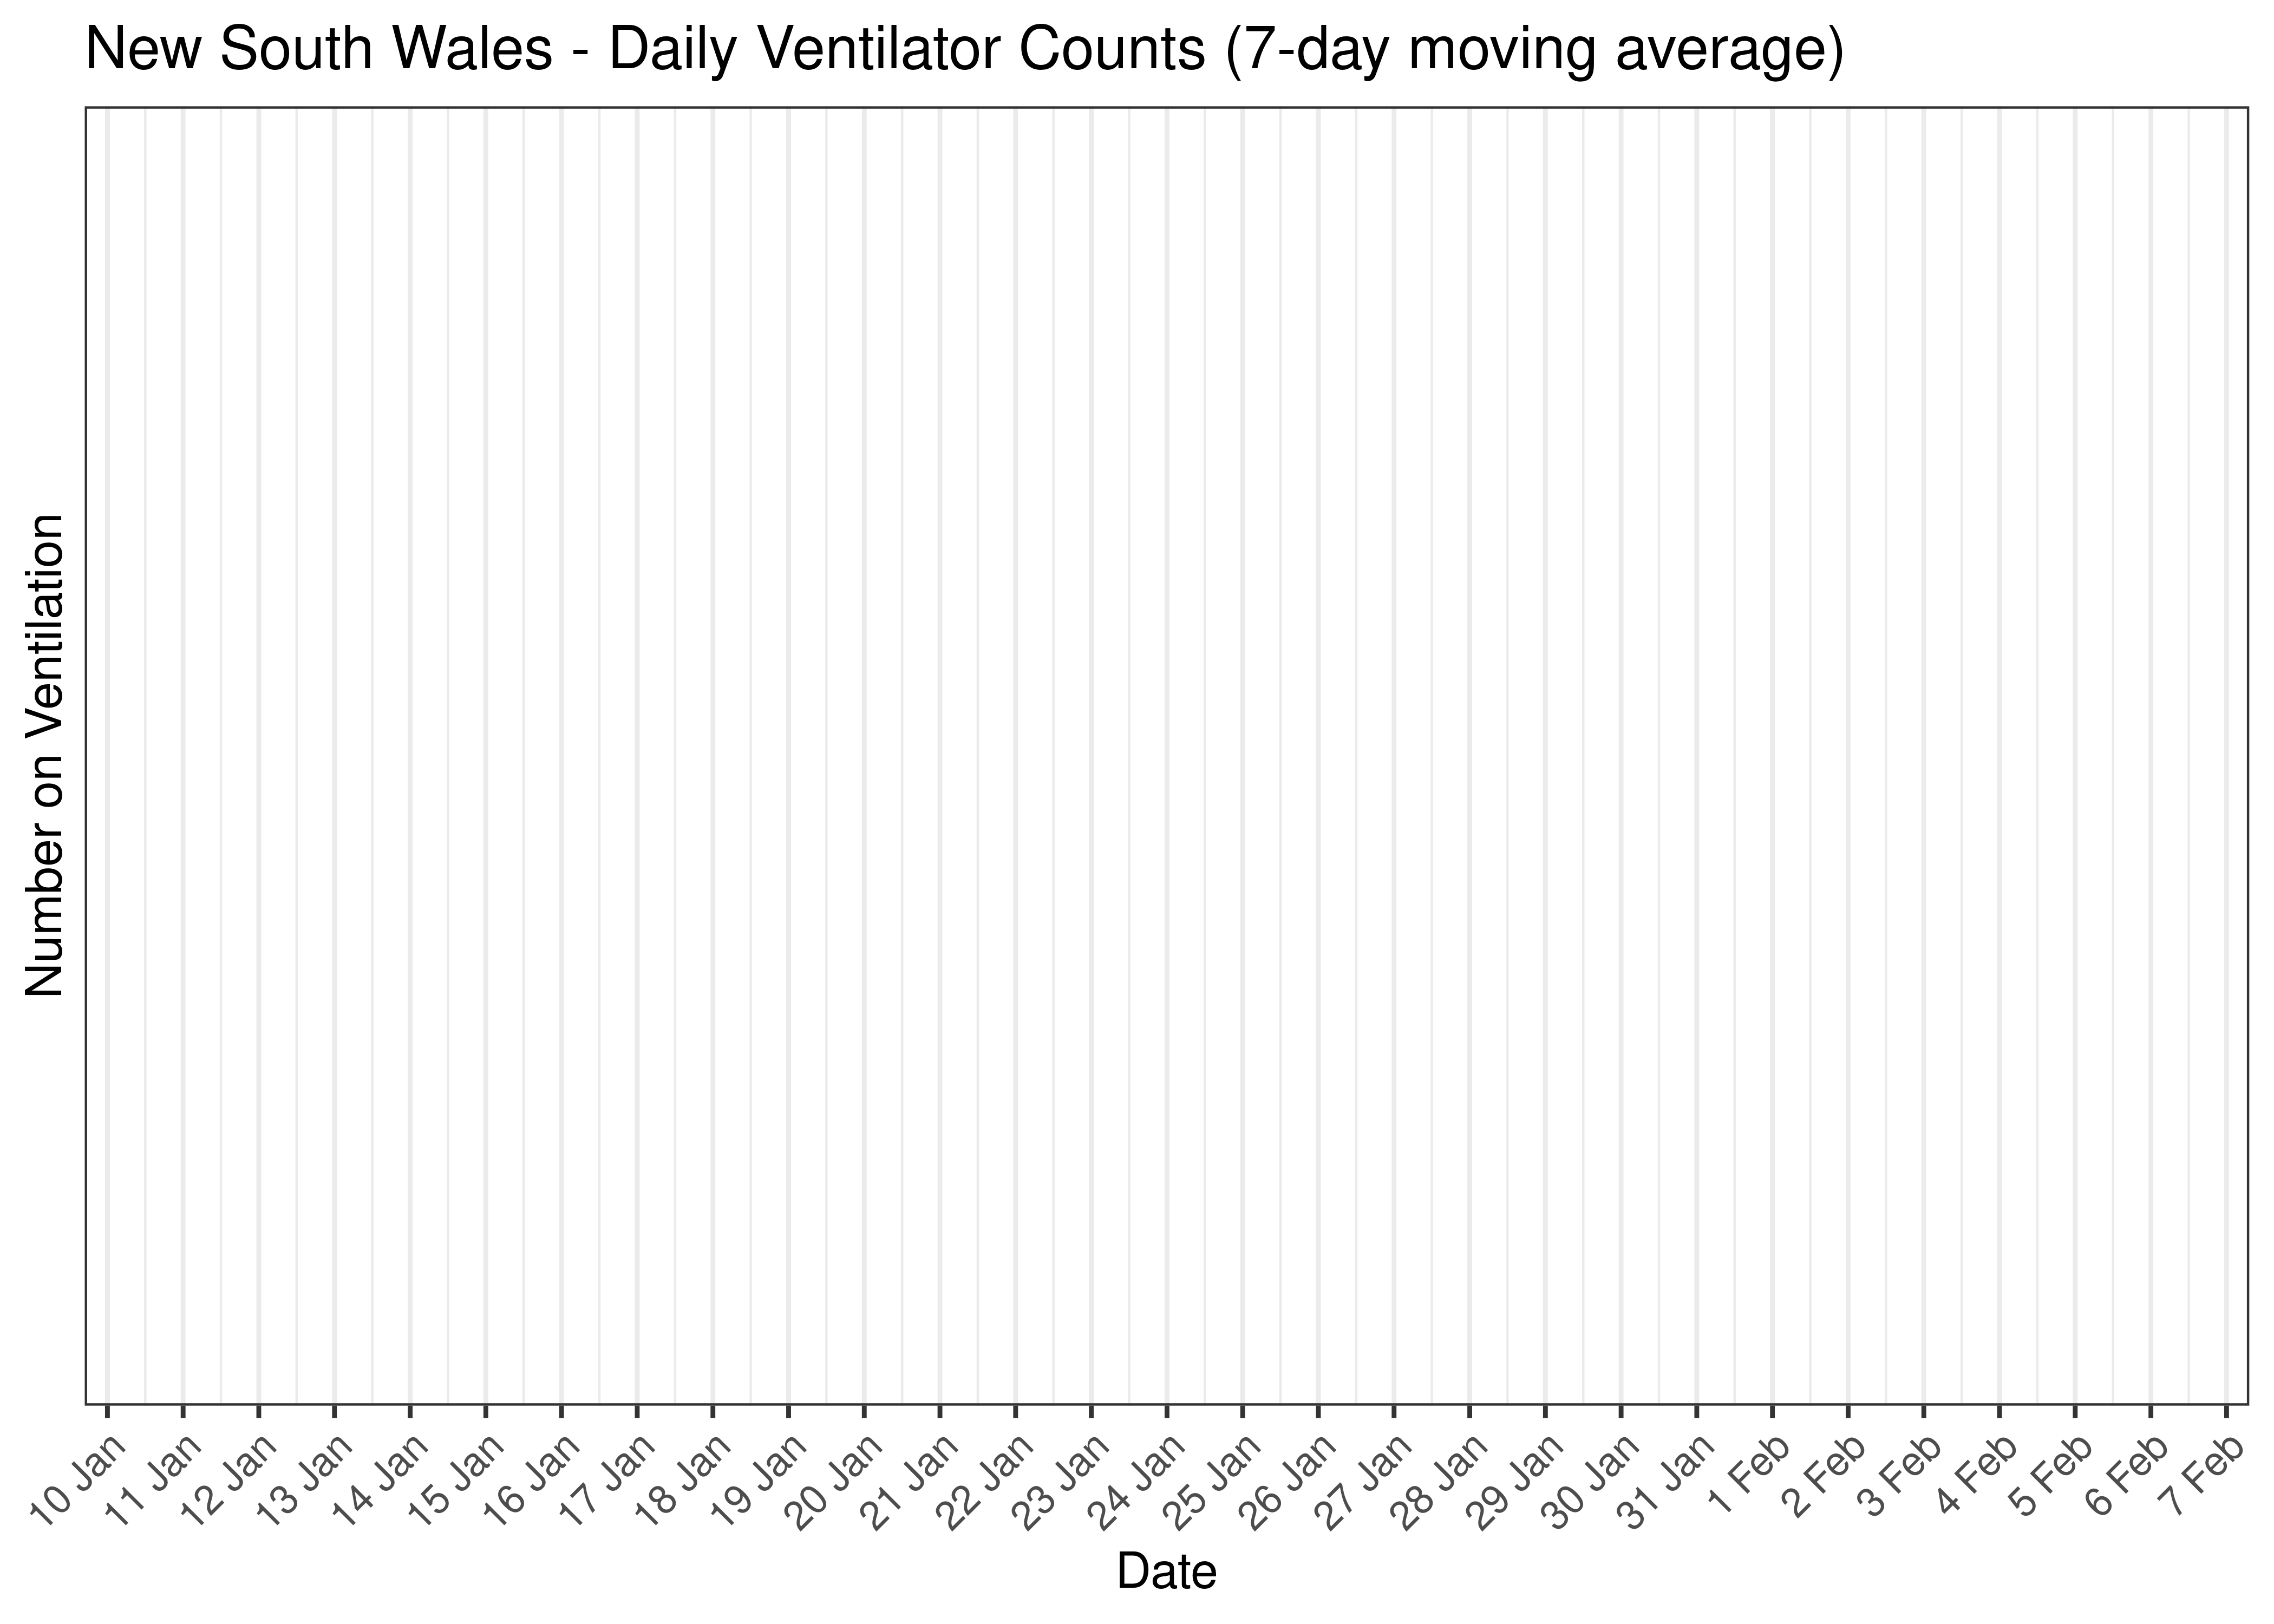 New South Wales - Daily Ventilator Counts for Last 30-days (7-day moving average)